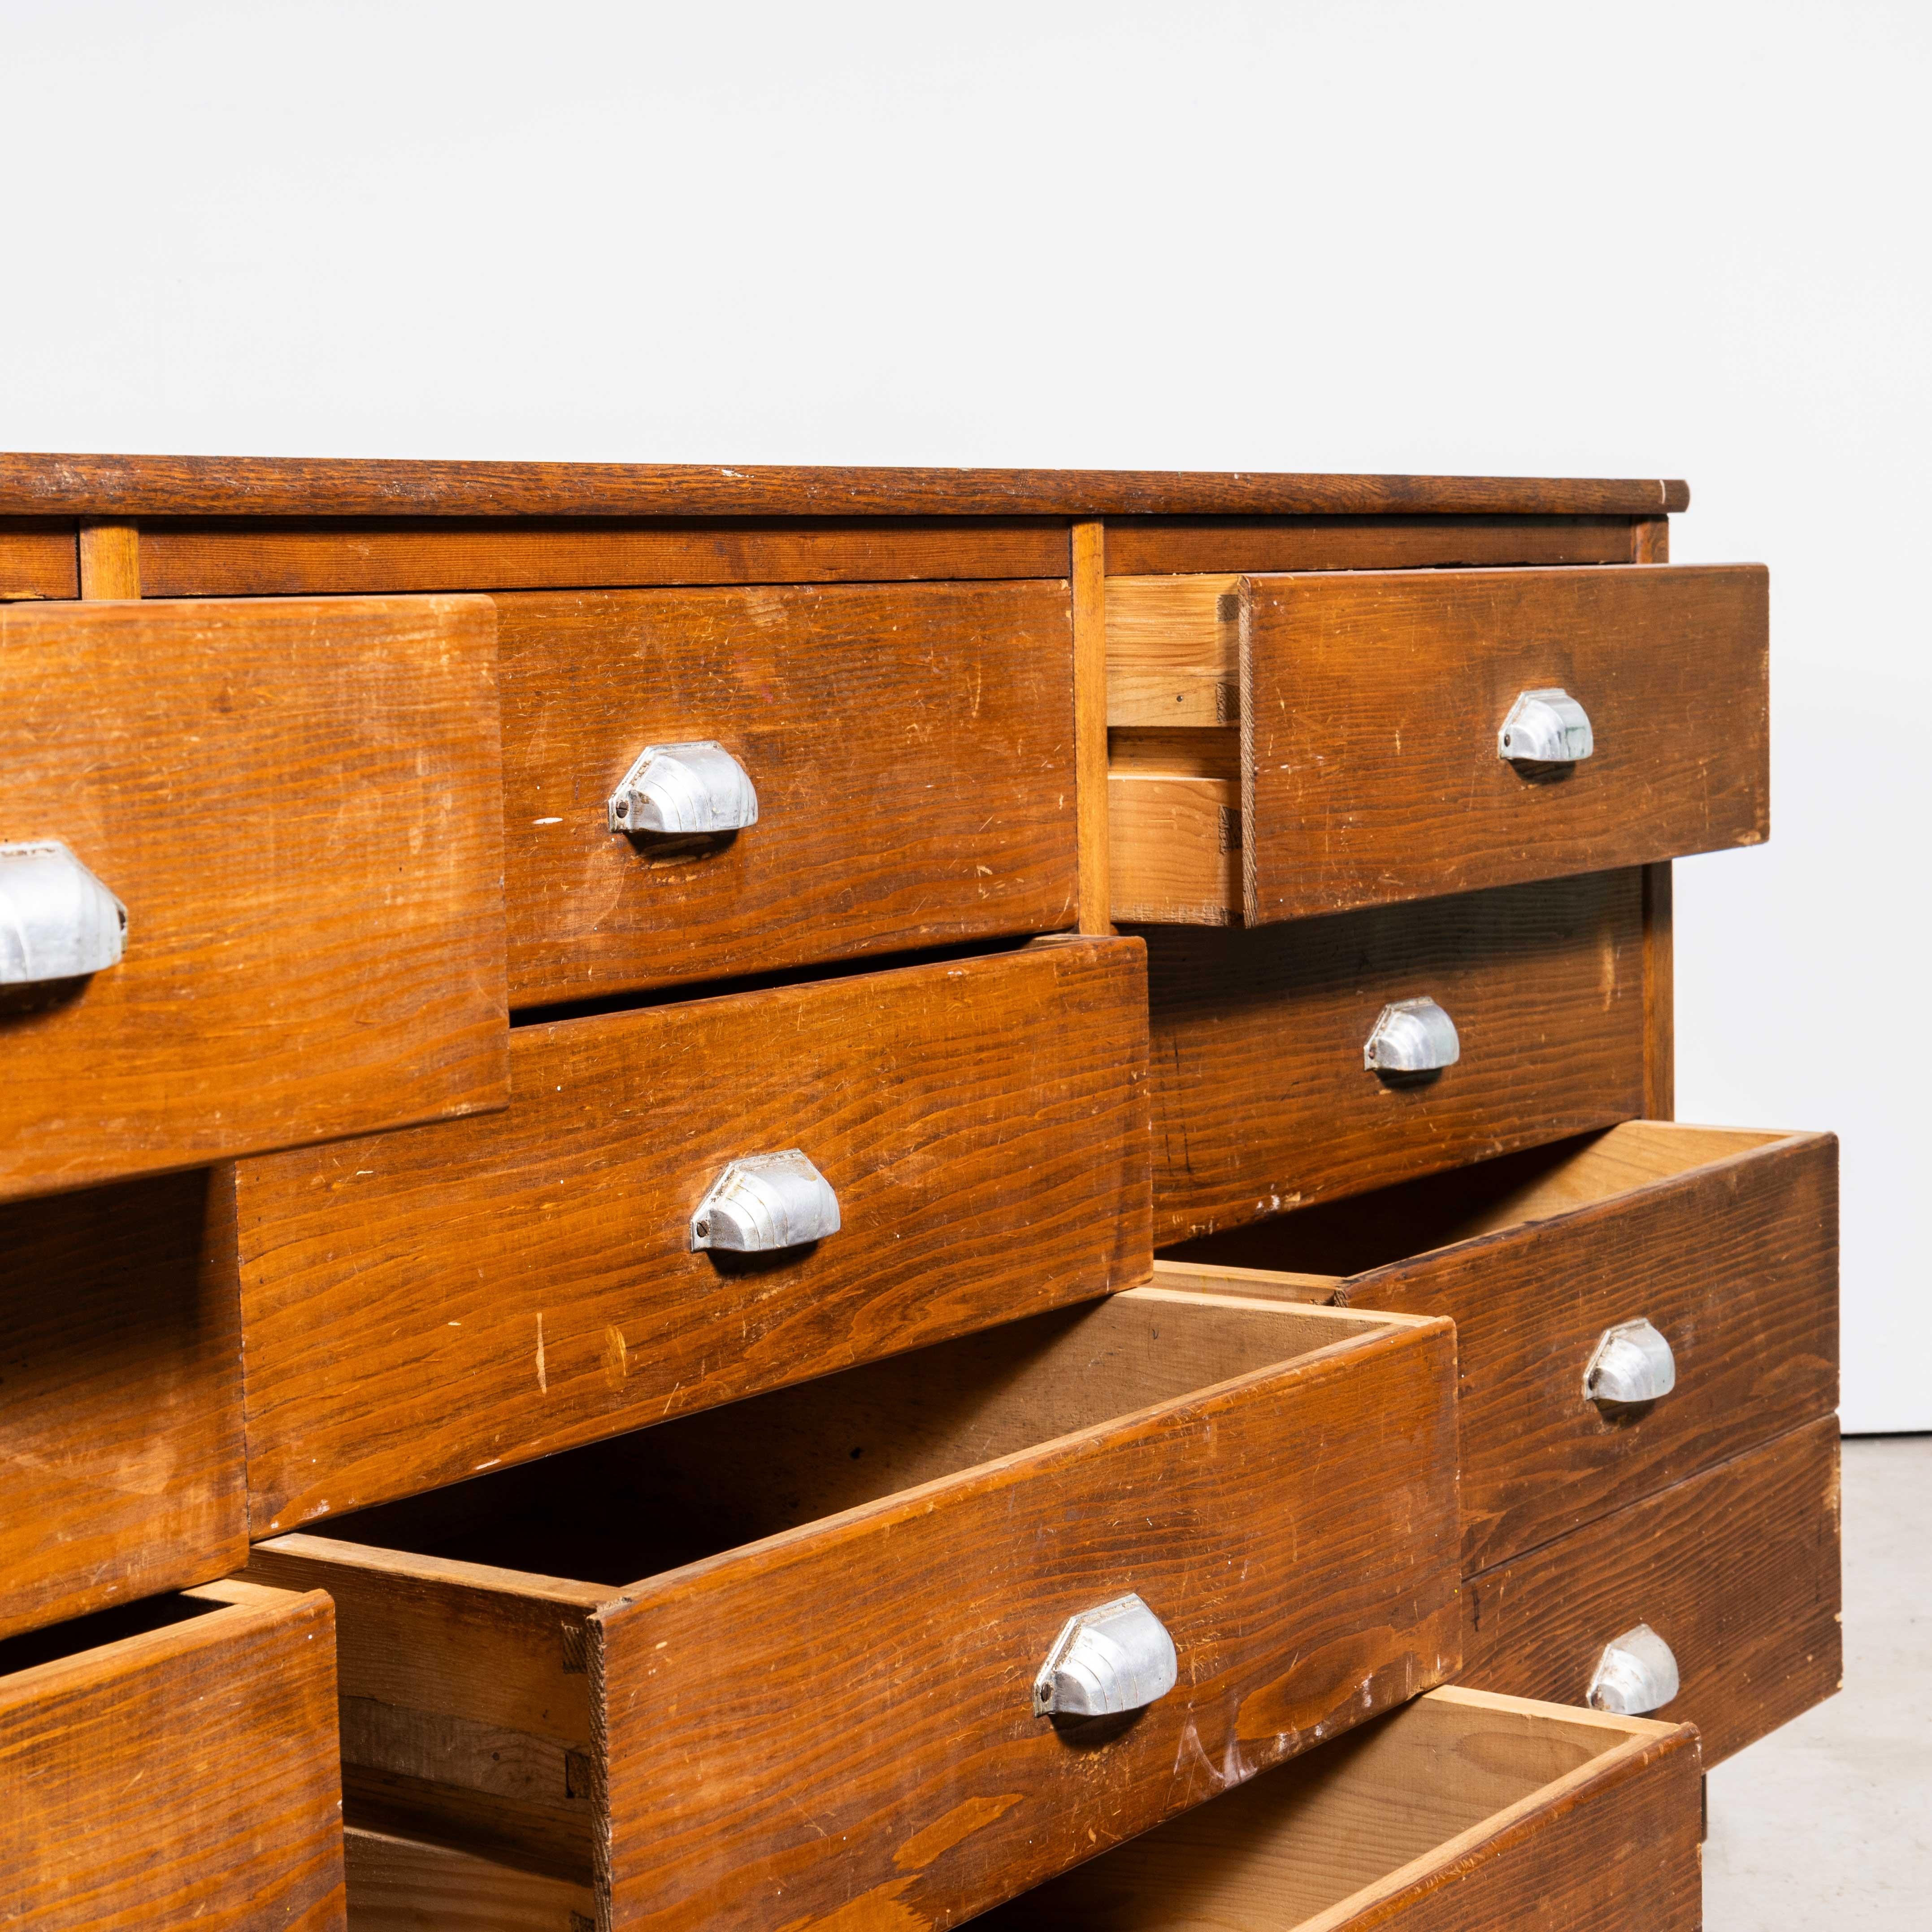 1950’s Large Bank Of French Workshop Drawers – Twenty Drawers
1950’s Large Bank Of French Workshop Drawers – Twenty Drawers. Good set of original workshop drawers sourced in the east of France. Made almost entirely from pitch pine with big generous